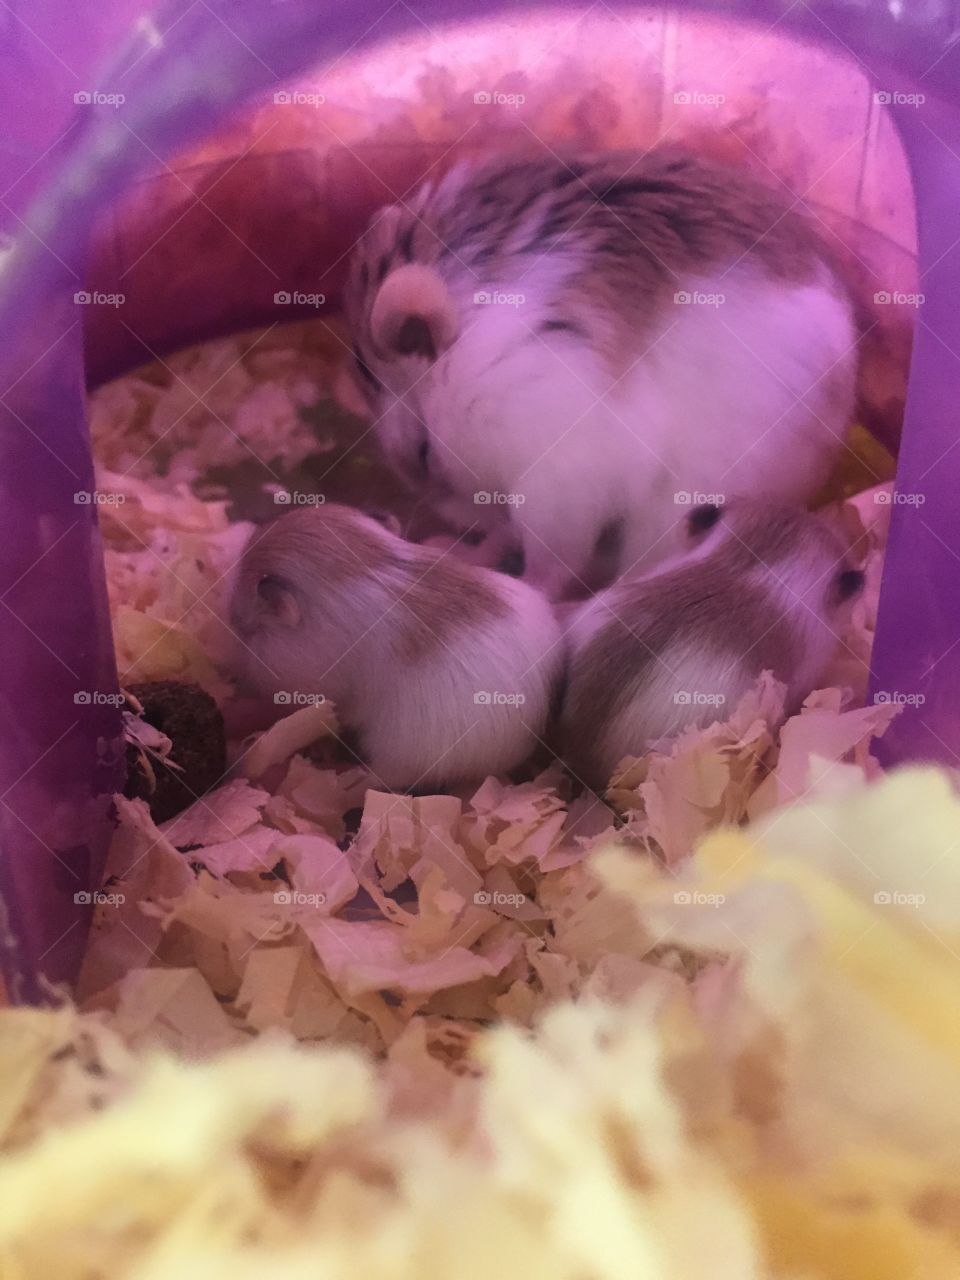 Baby hamsters